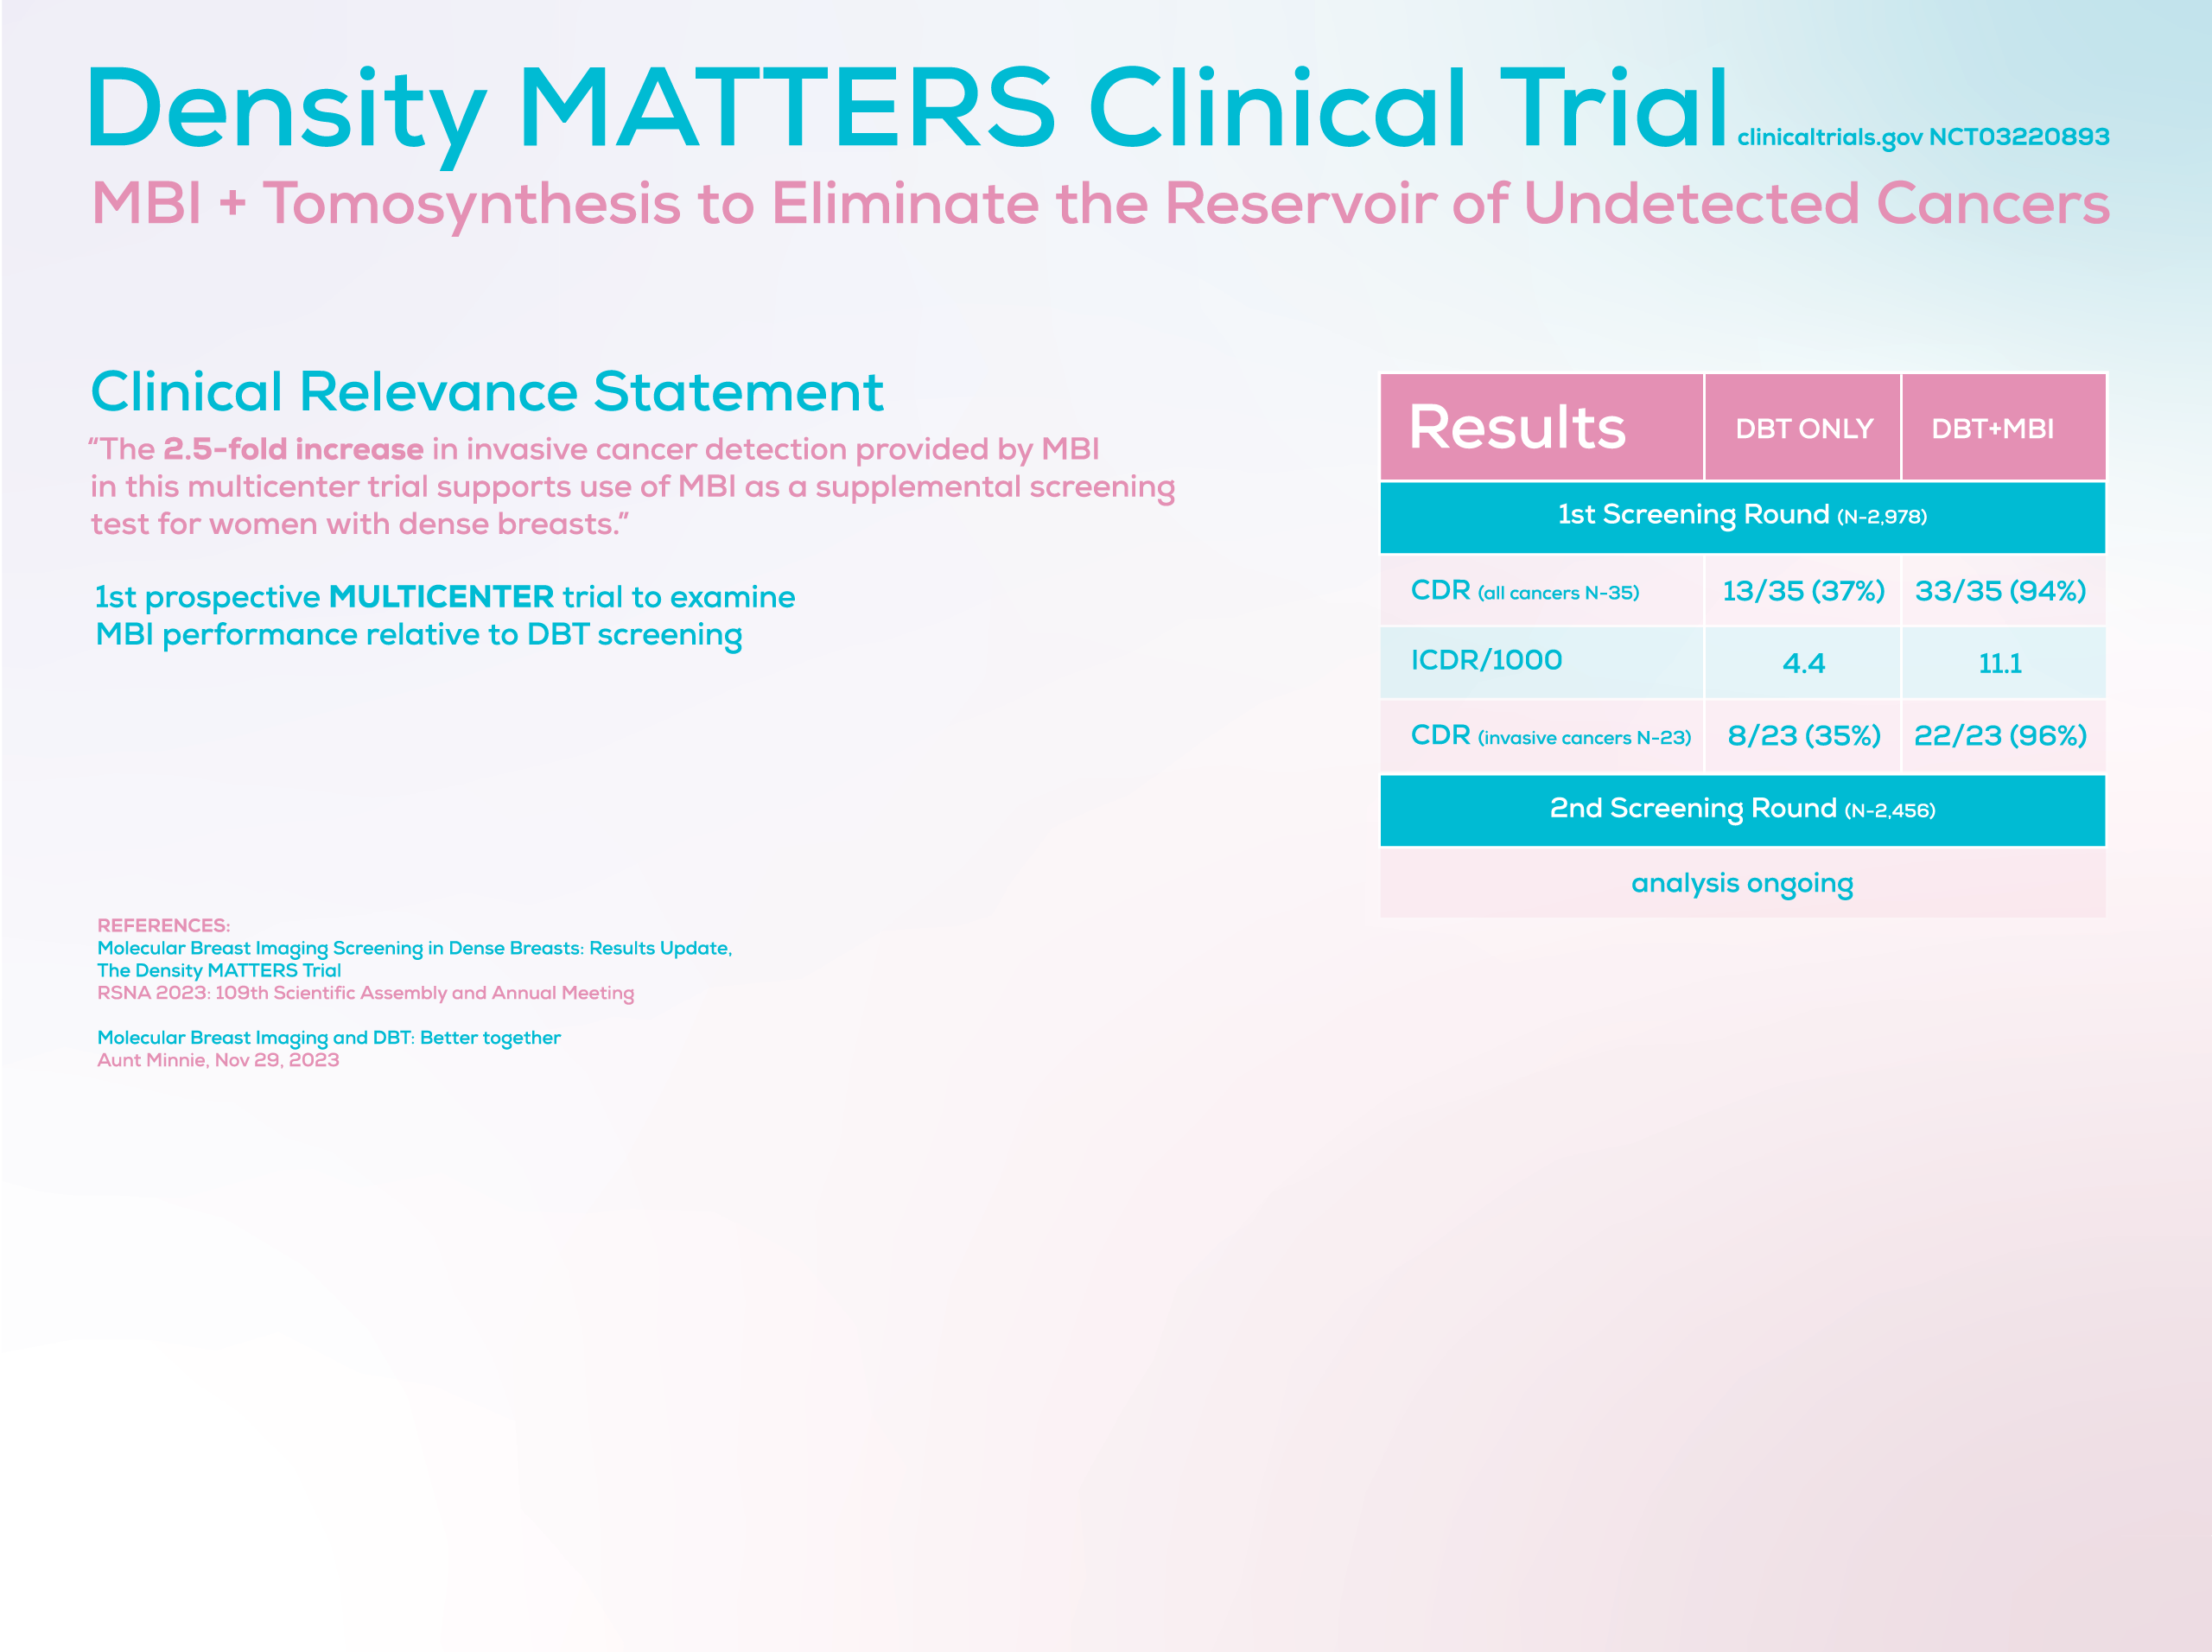 Density matters clinical trial. MBI + tomosynthesis to eliminate the resevoir of undetected cancers.